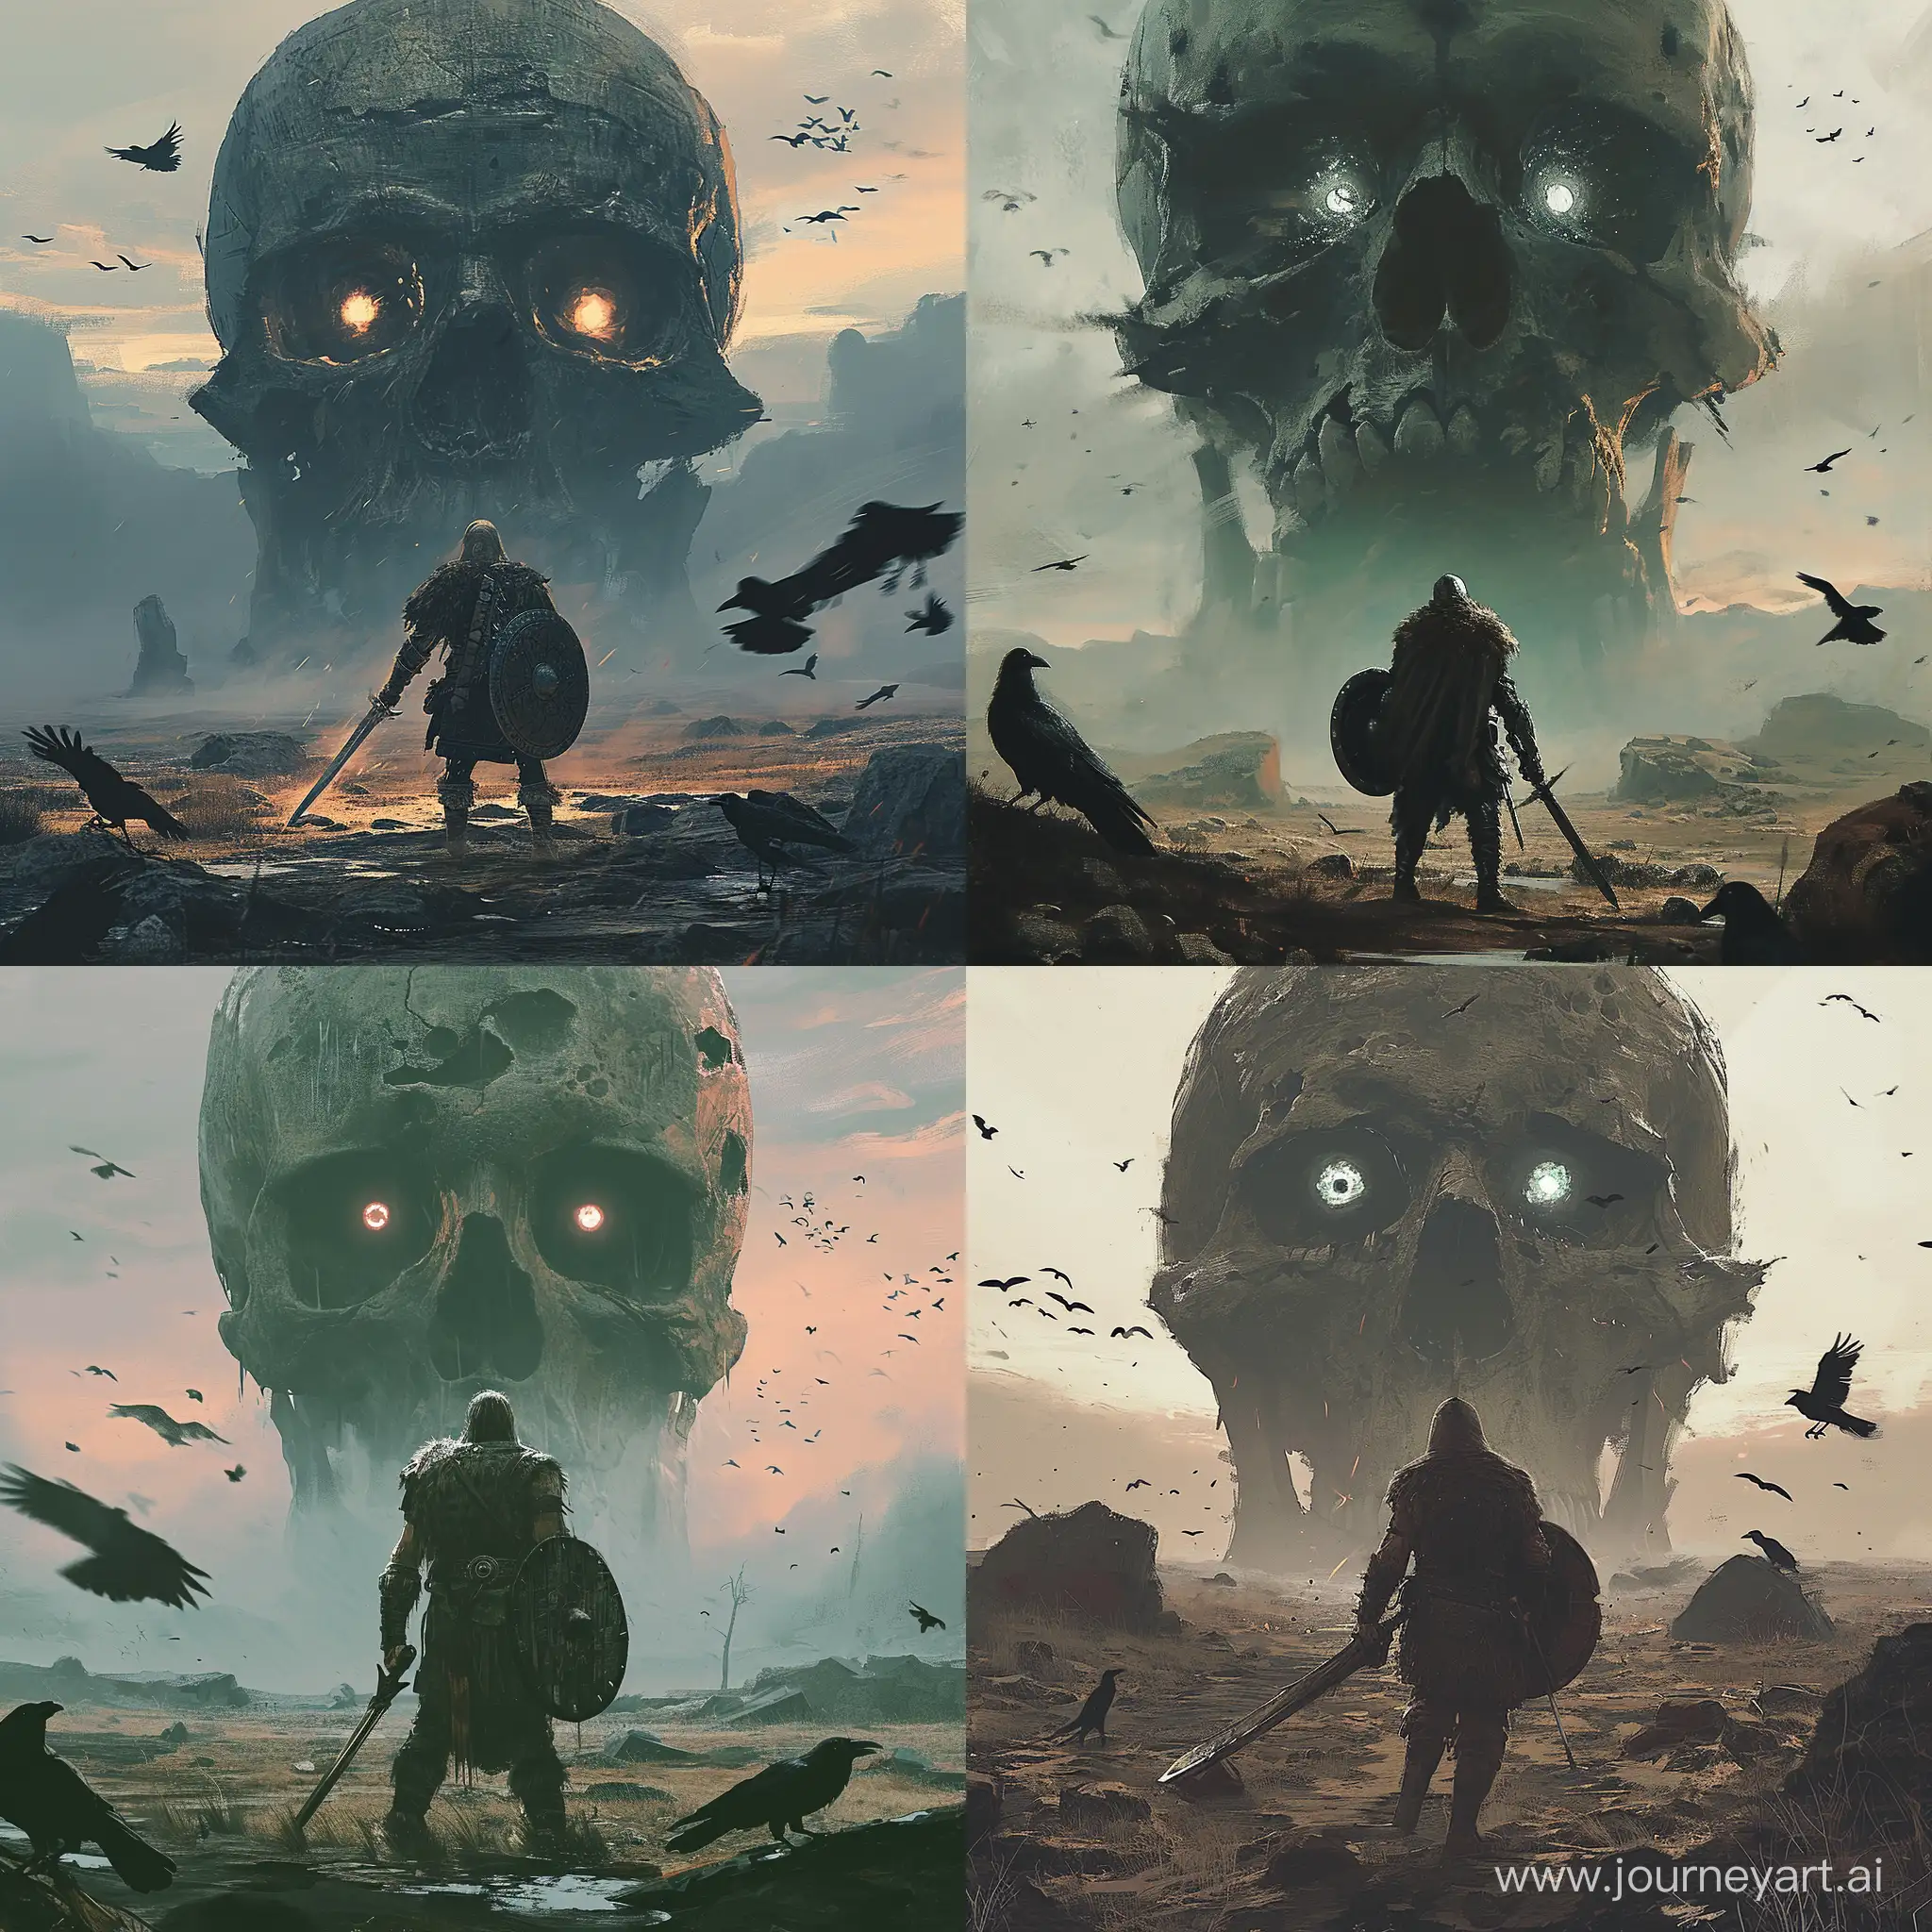 Lonely-Warrior-Confronts-Giant-Skull-at-Dusk